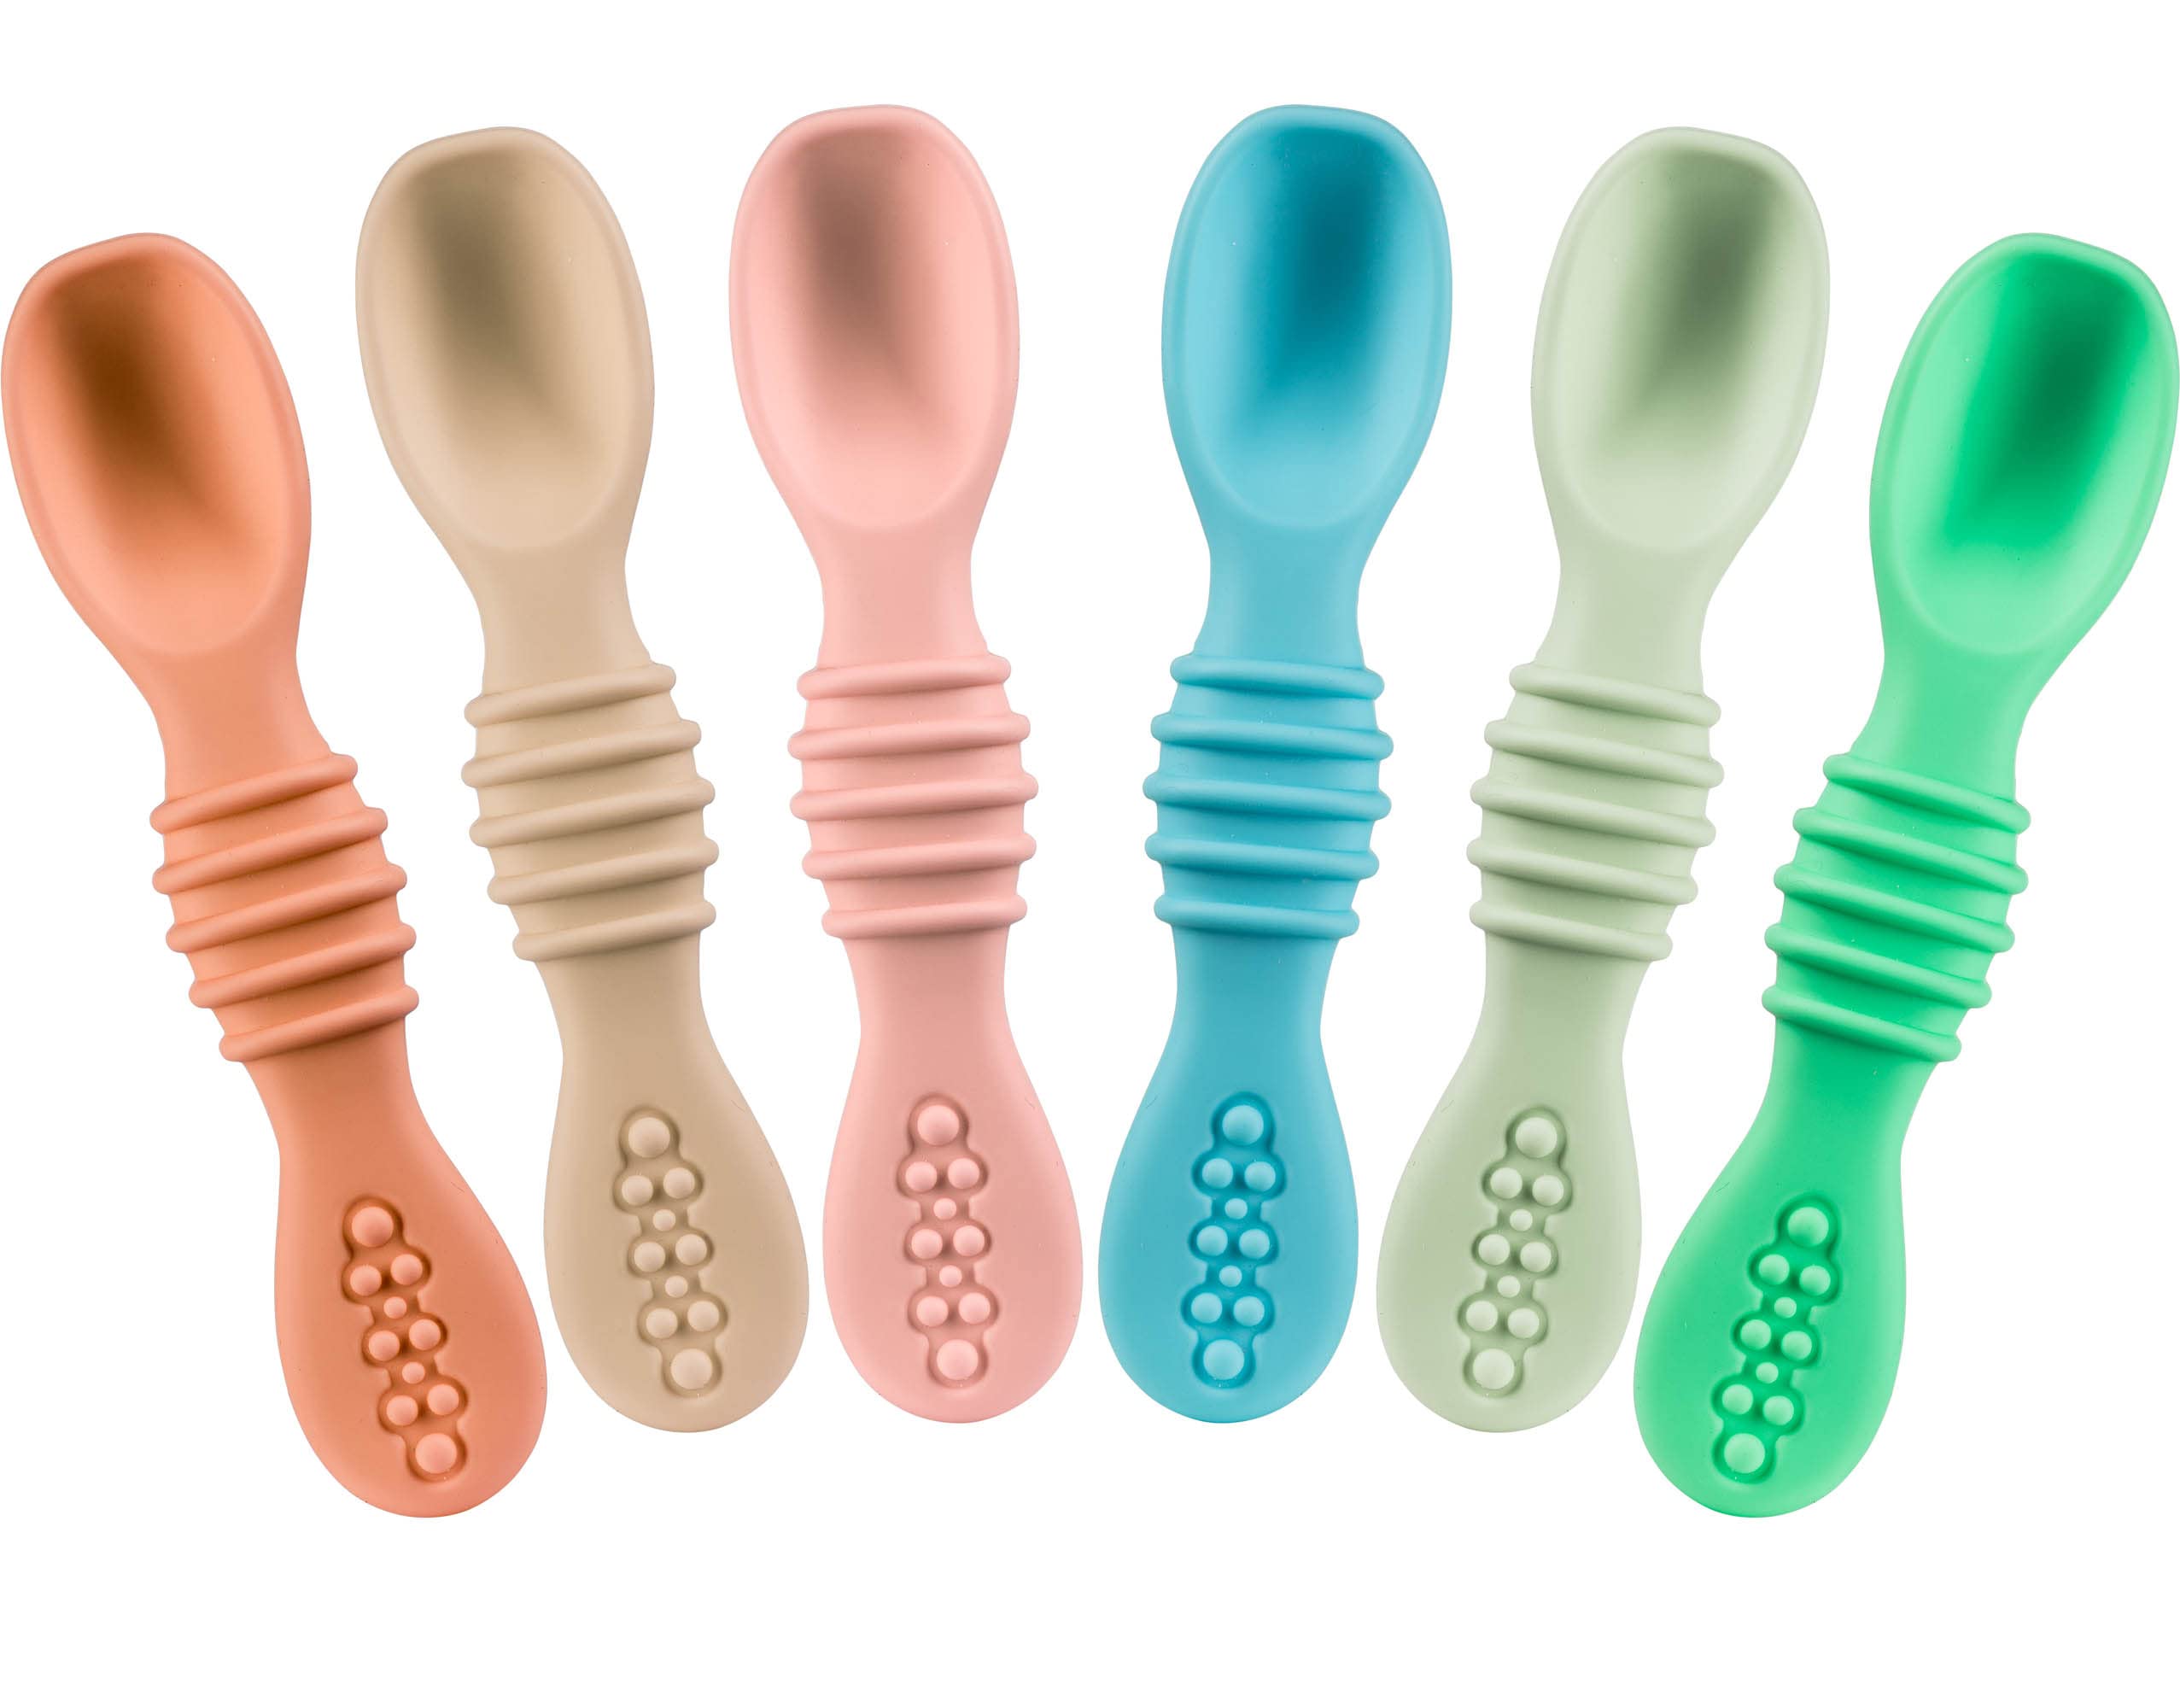 Silicone Baby Spoons First Stage Infant Feeding Spoon for Baby Led Wea